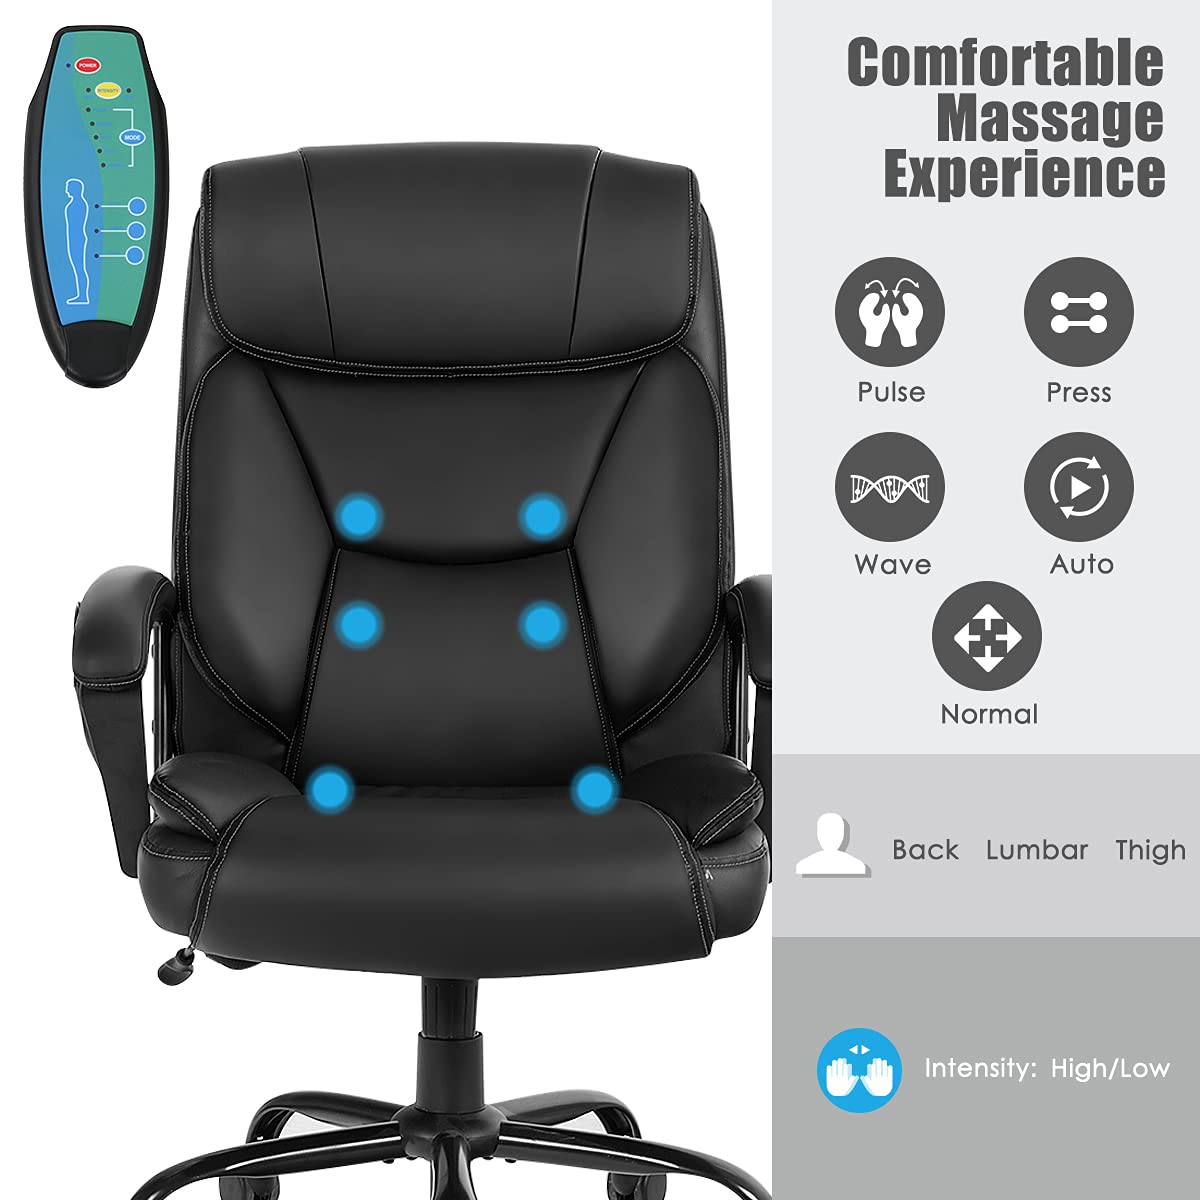 Giantex 500 lbs Big and Tall Office Chair, Massage Executive Chair w/ 6 Vibrating Points